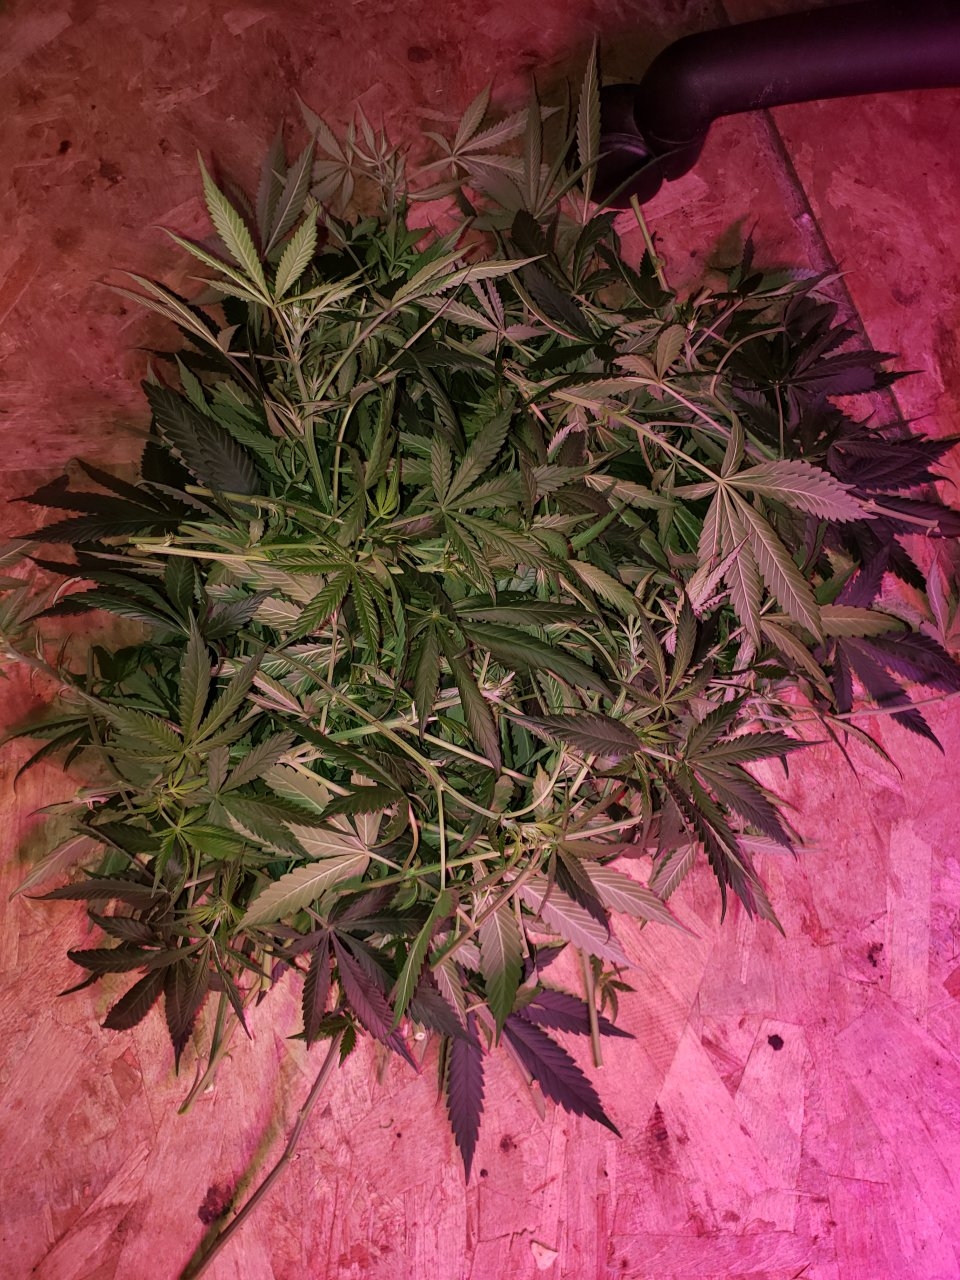 Lower branches removed from GSC in flower